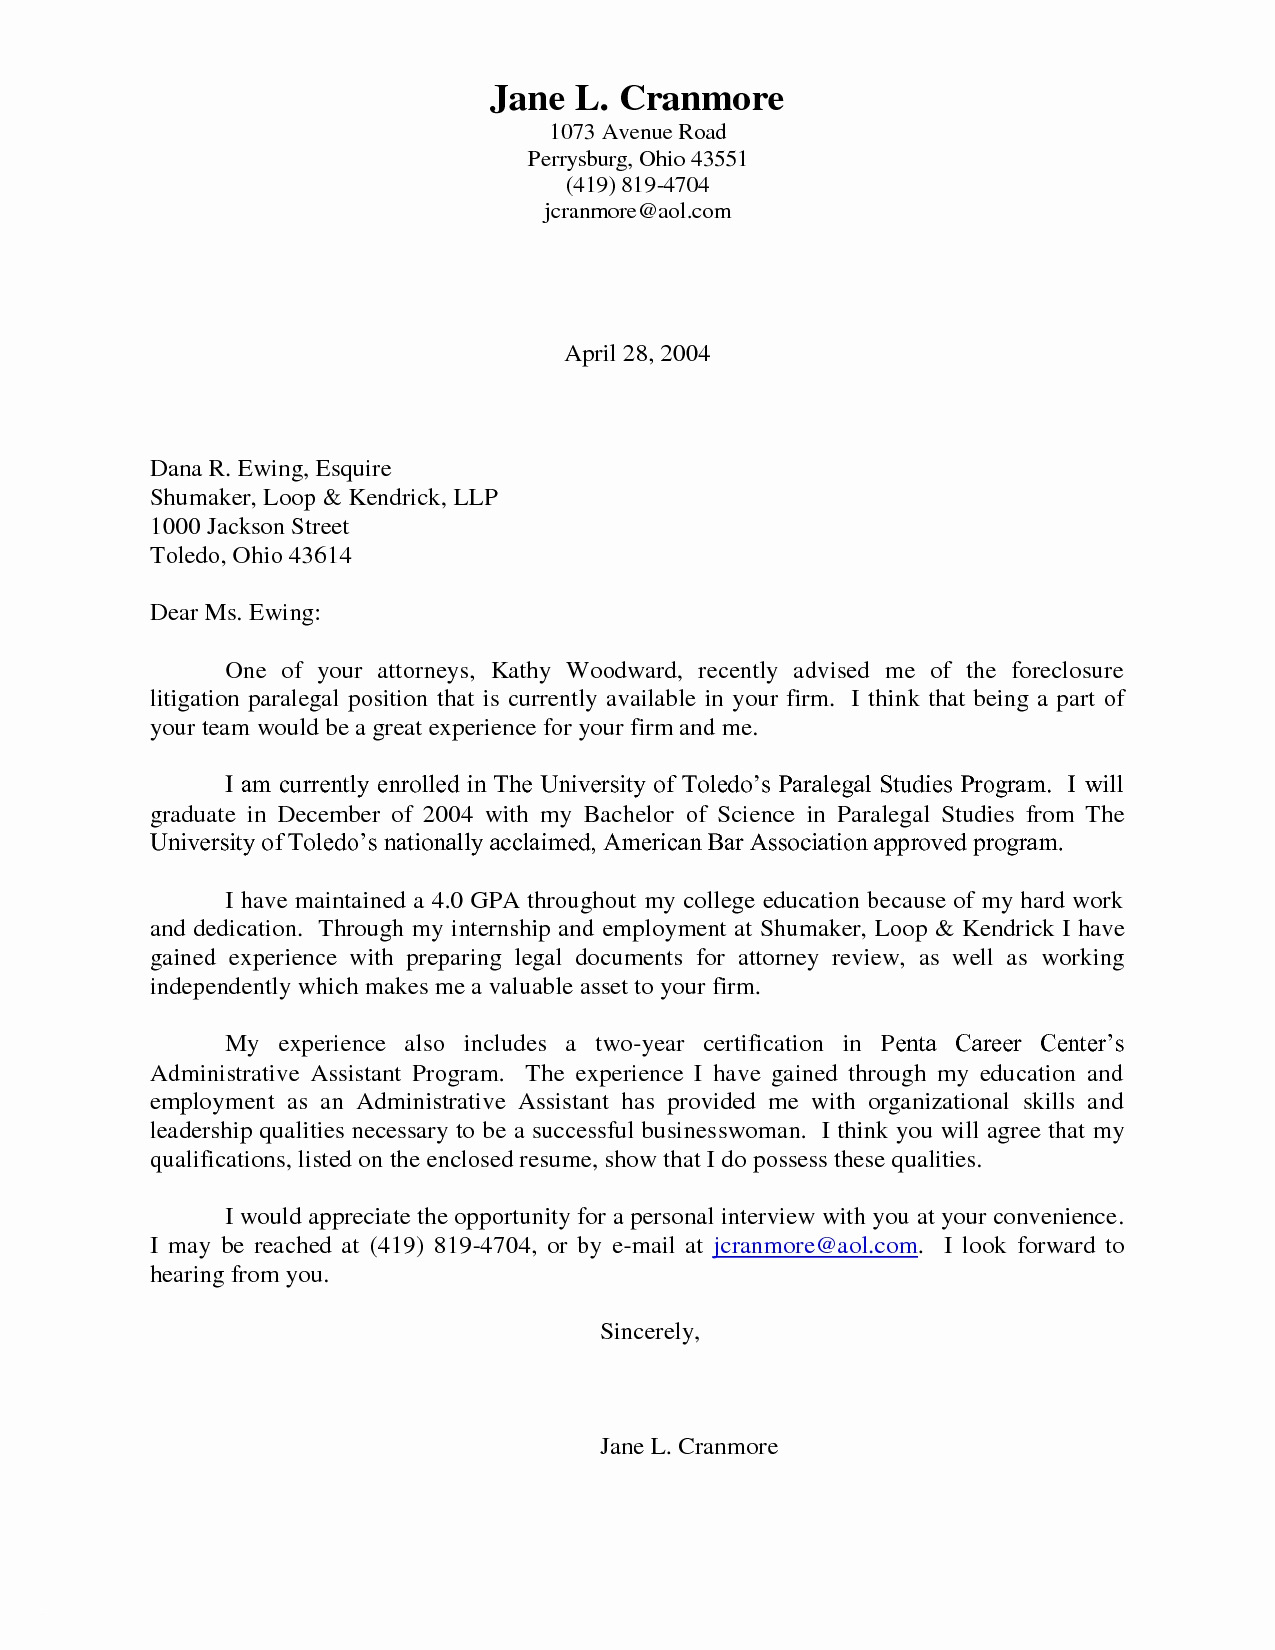 Foreclosure Letter Template - Sample Paralegal Resume Beautiful Personal Injury Lawyer Cover